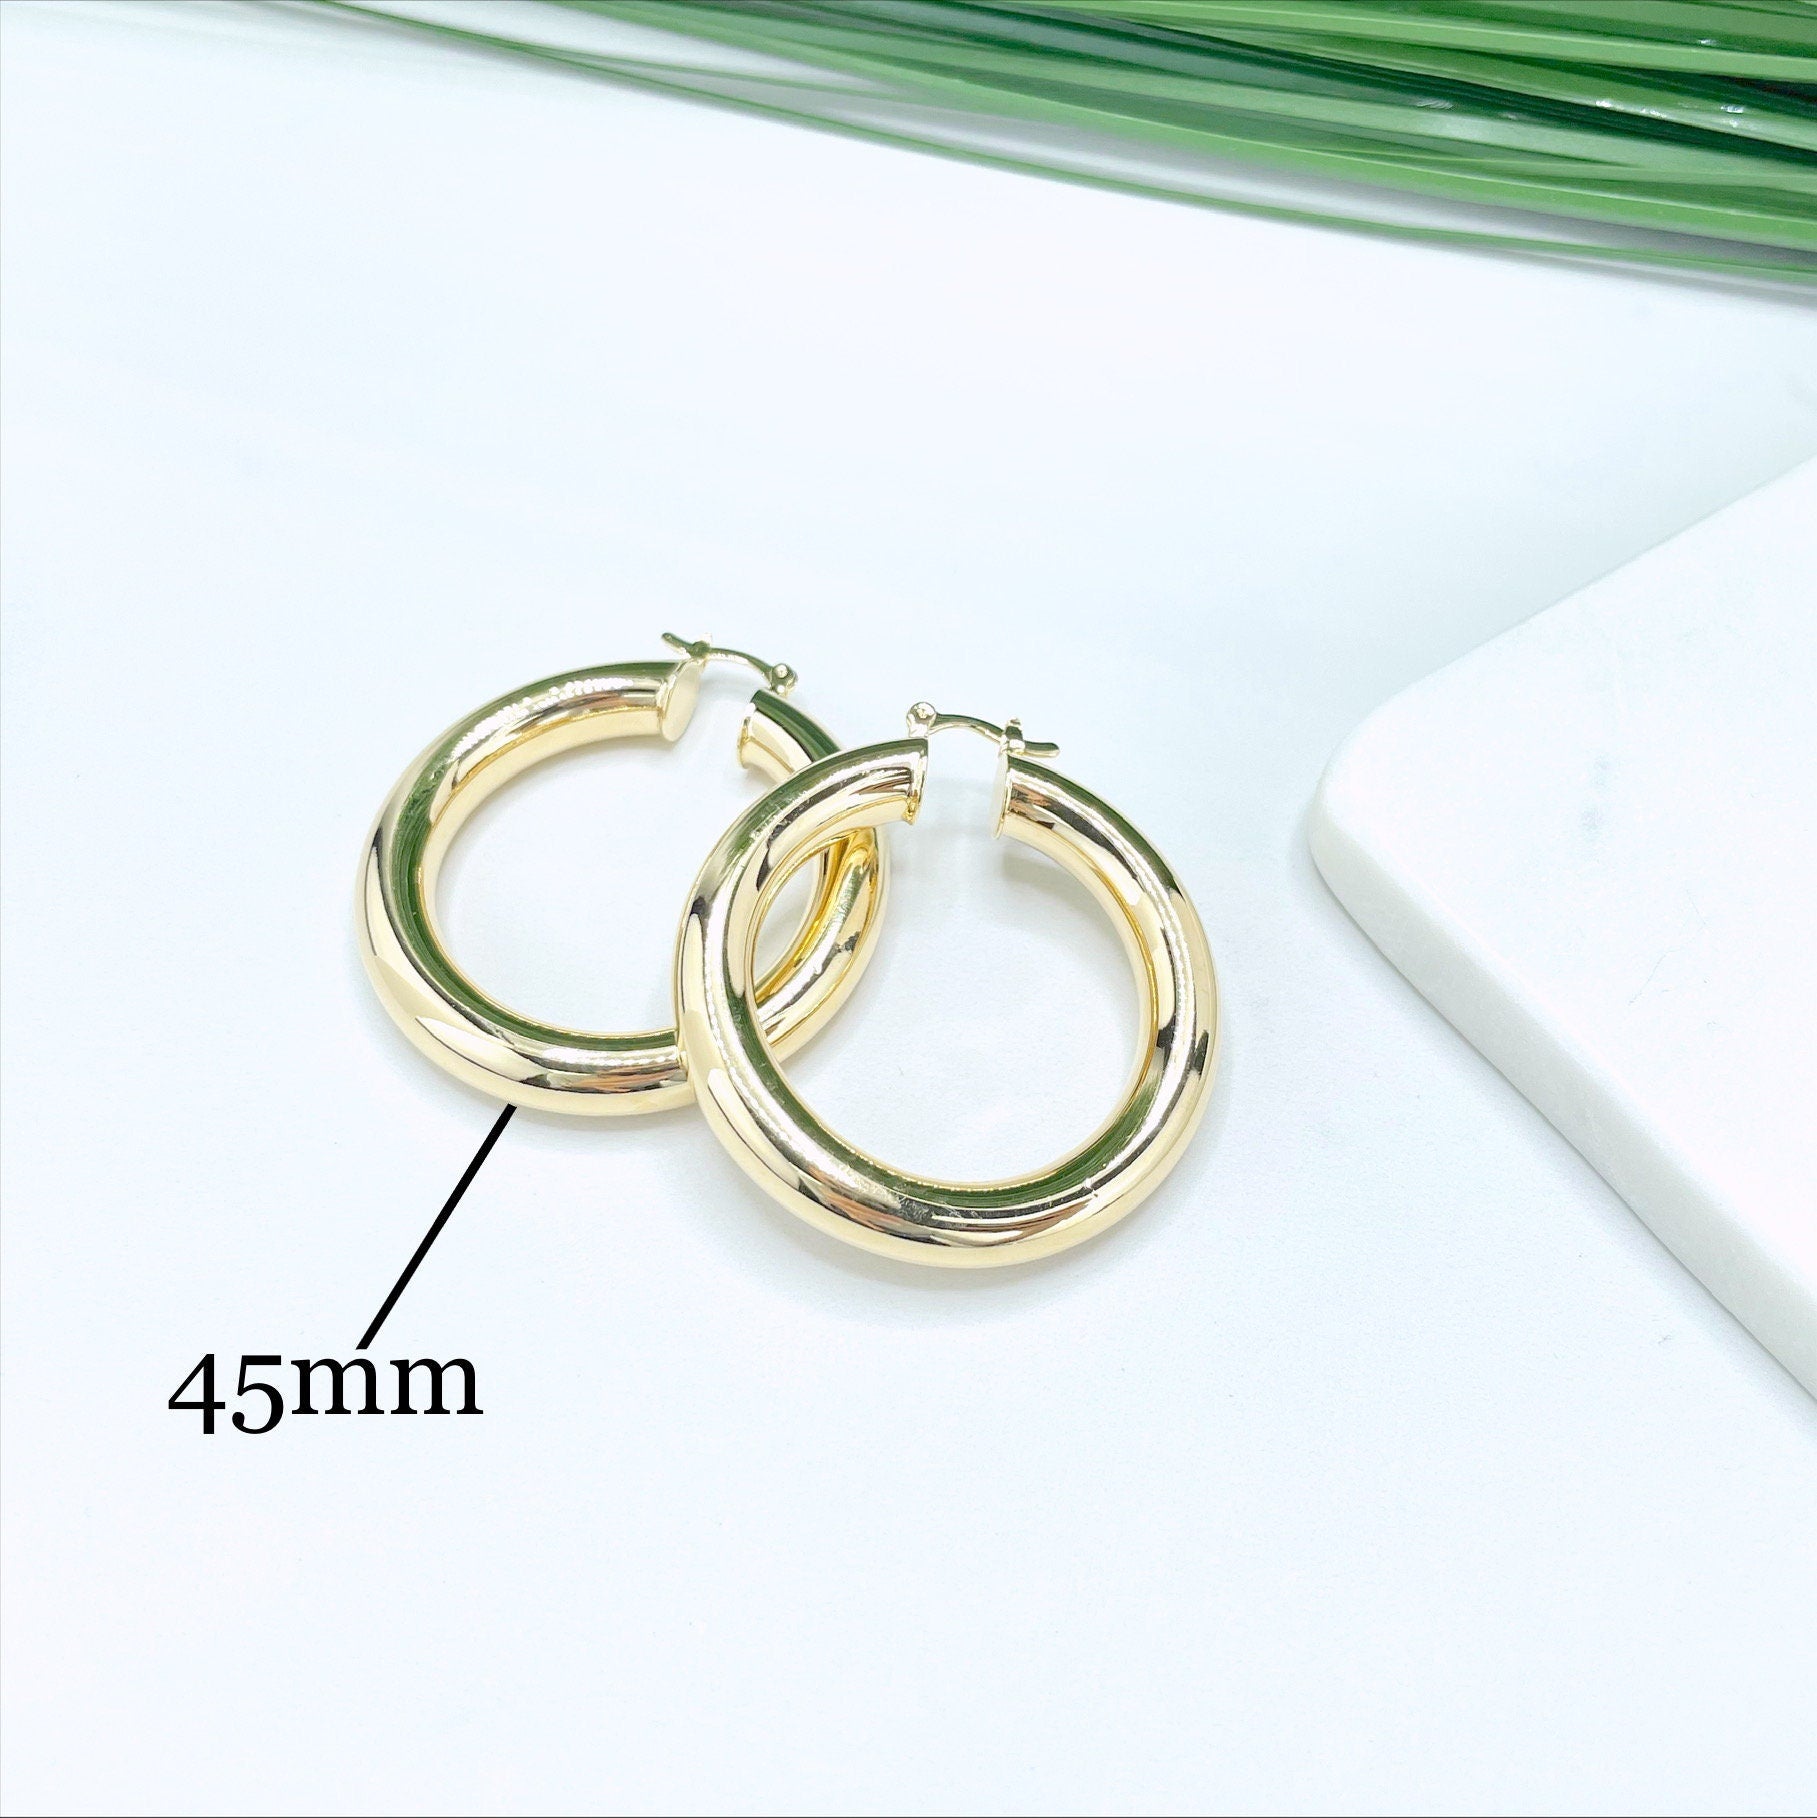 18k Gold Filled Light Tubular Hoops Earrings, Available in 25mm, 30mm, 35mm or 45mm, Wholesale Jewelry Making Supplies